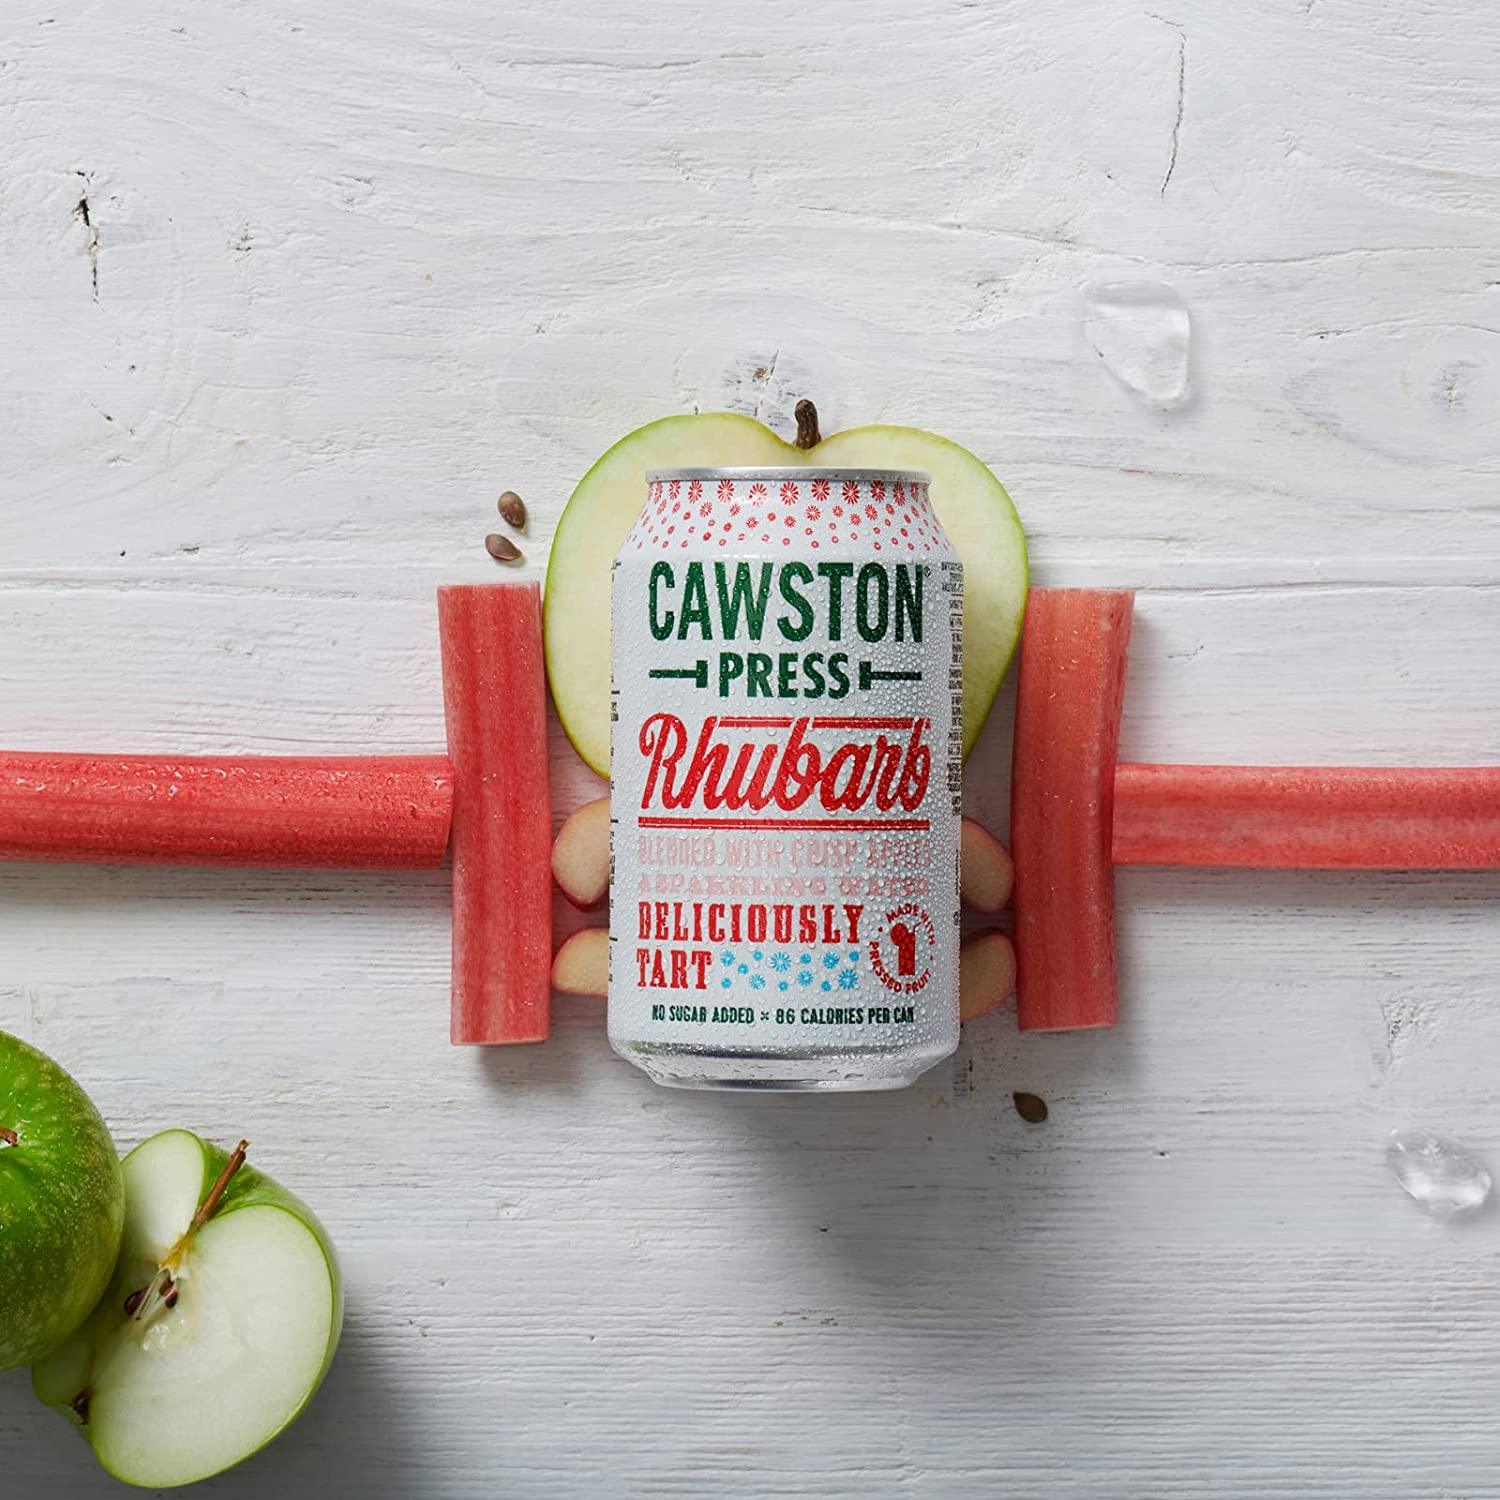 Cawston Press Rhubarb Fizzy Drink Blended With Sparkling Water and Pressed Apple Juice (330ml x 24 cans) - Vending Superstore